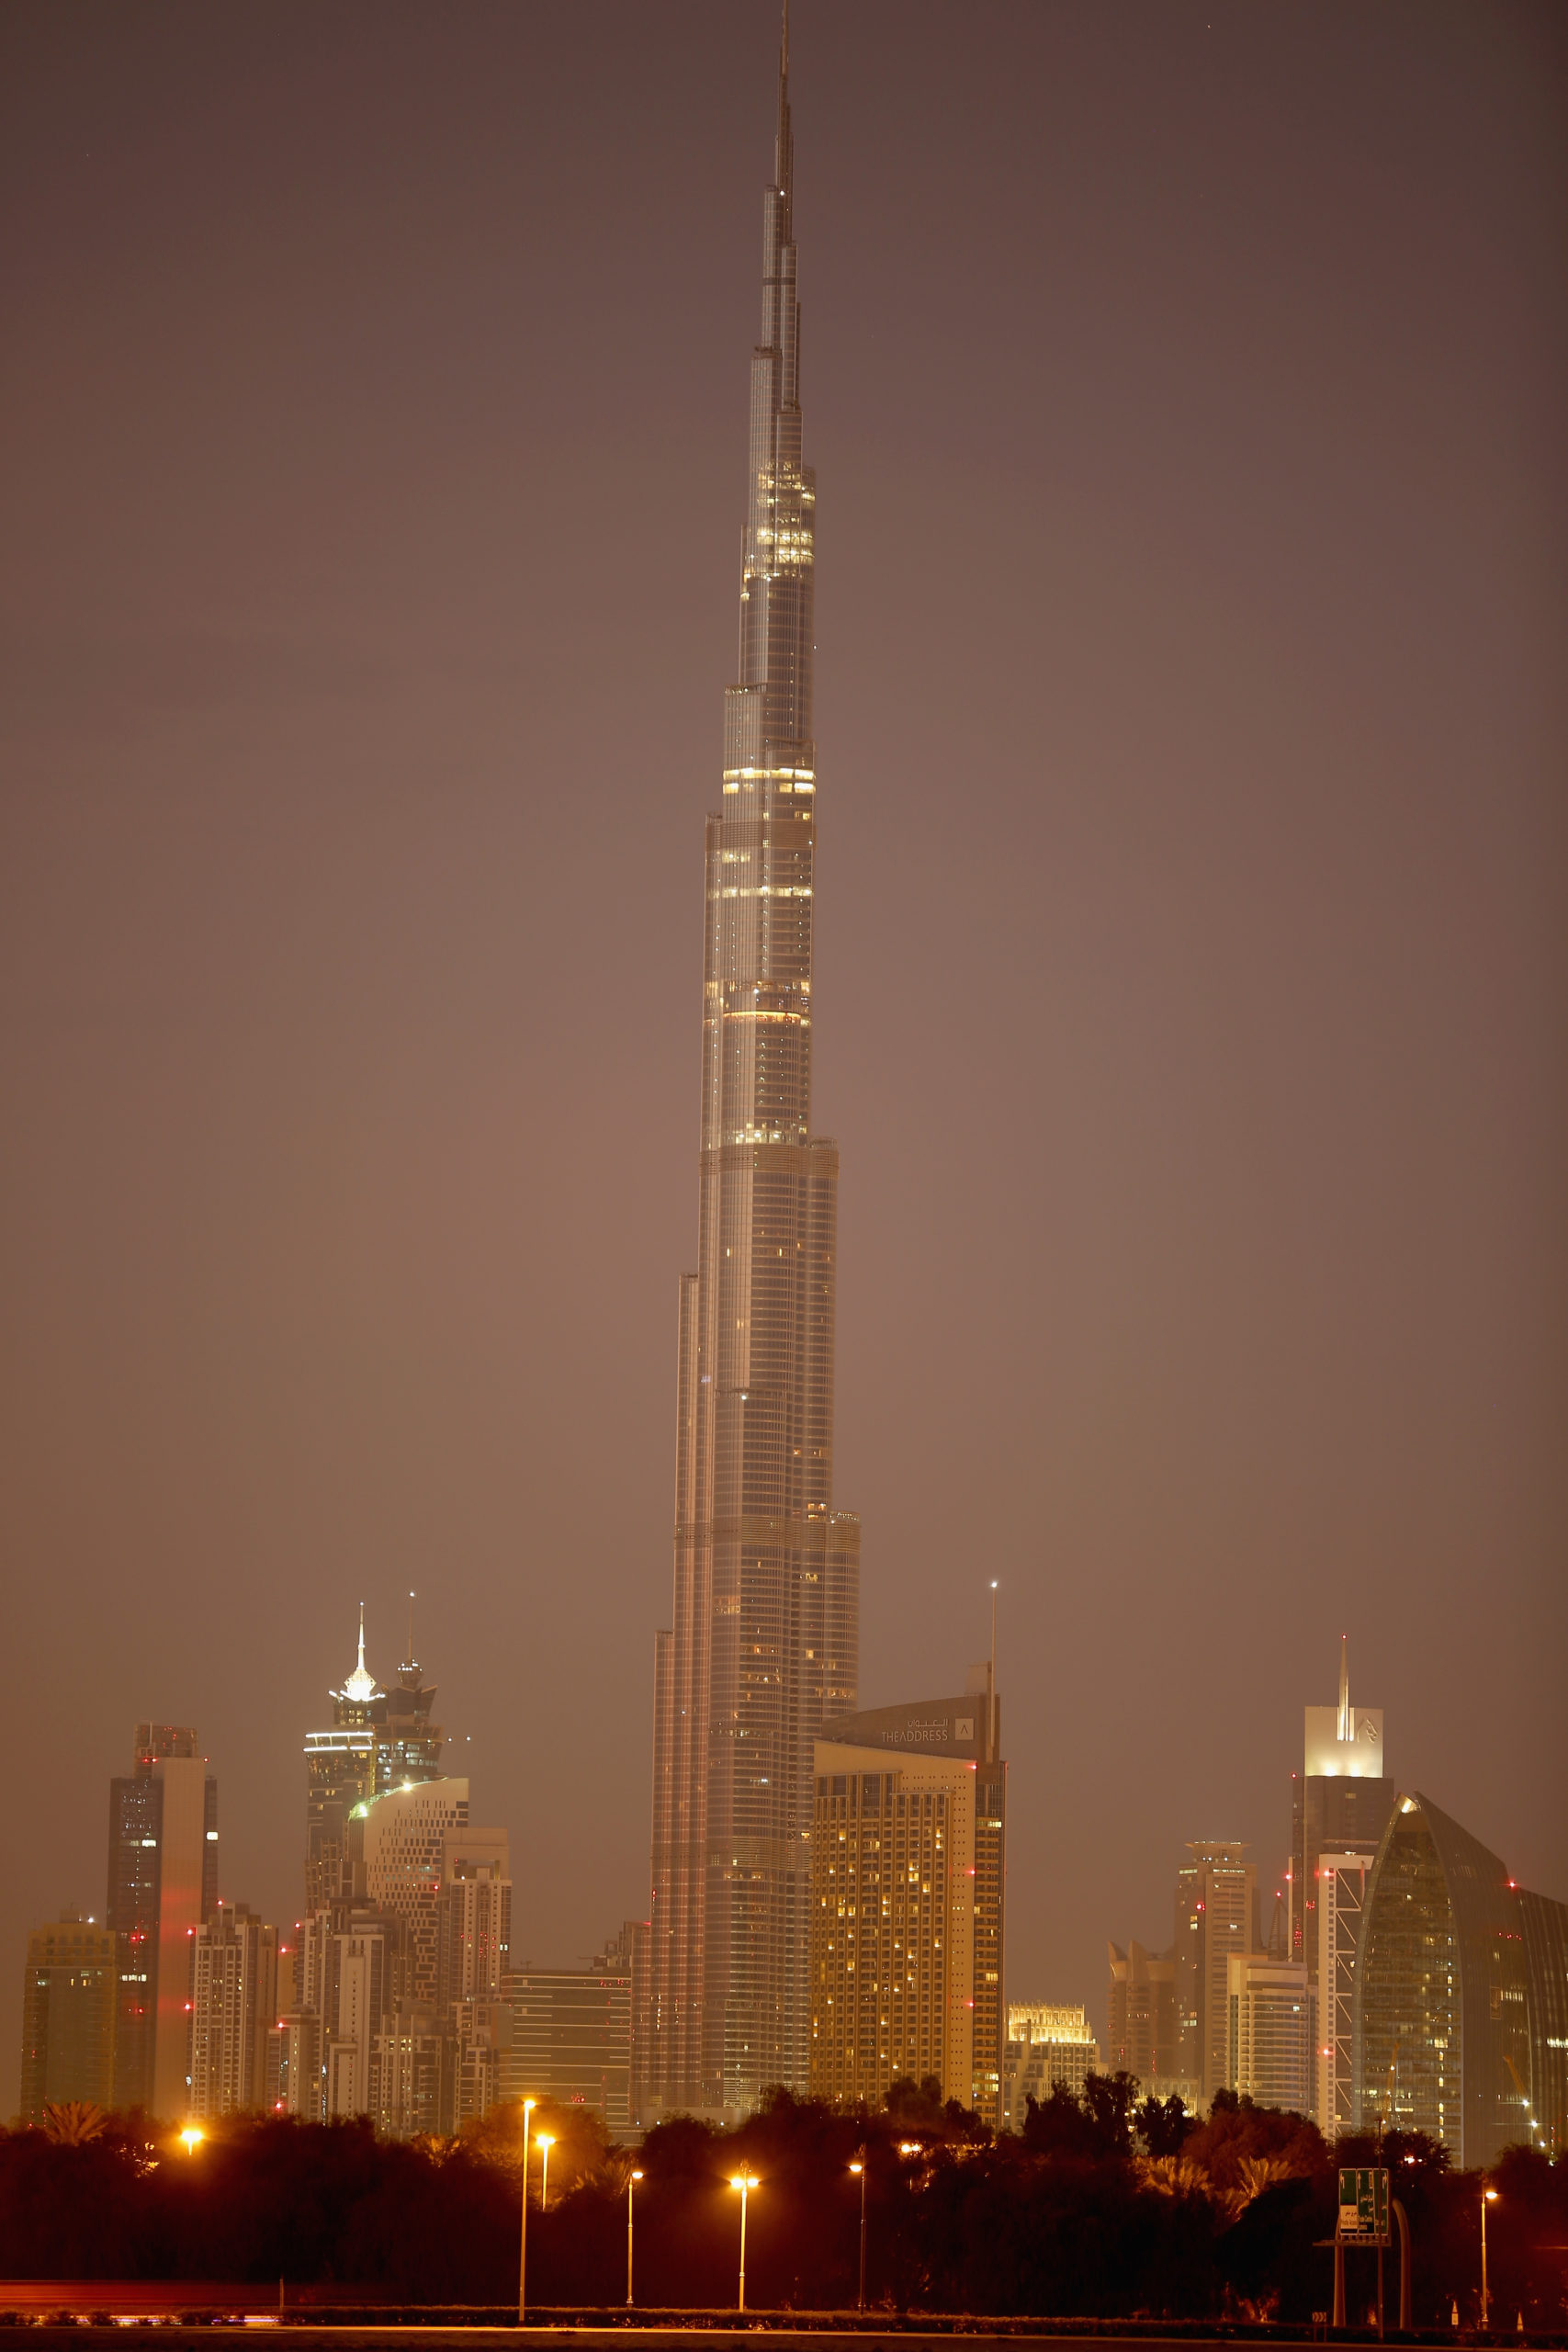 The World’s Tallest Building May Soon Be Without Lifts Or A/C